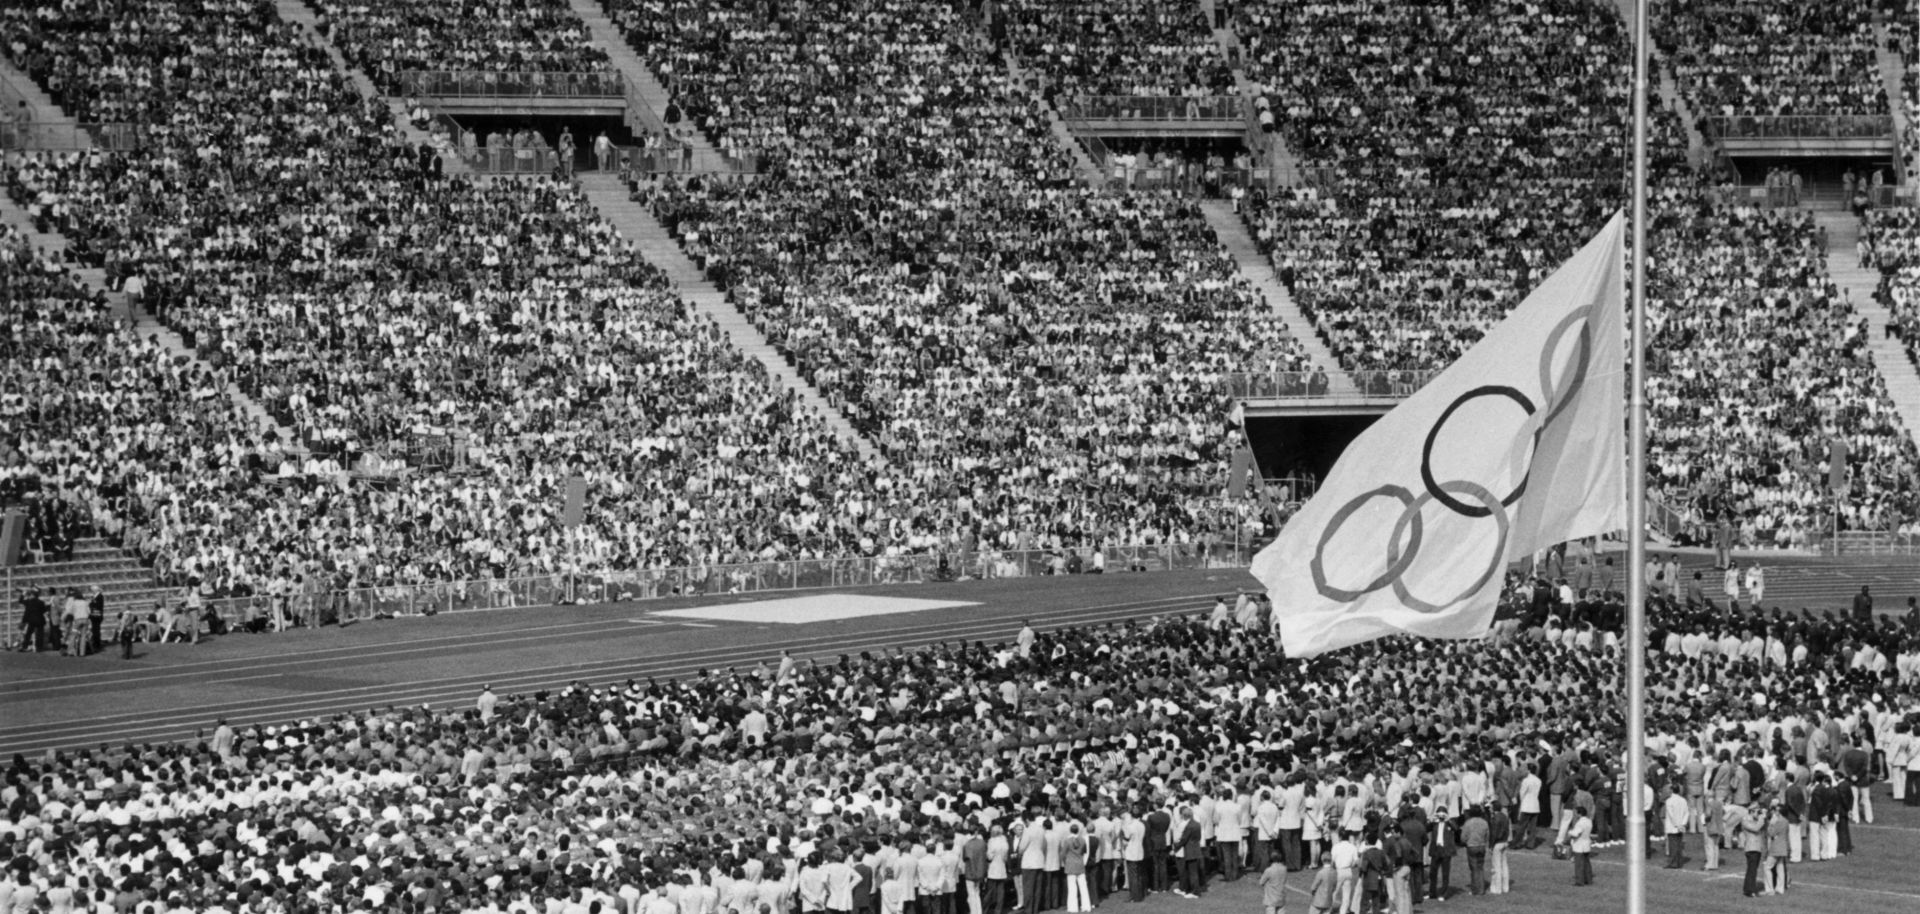 The Olympic flag flying at half-mast in the Olympic Stadium in Munich during the Sept. 6, 1972, memorial service for the Israeli athletes who were killed by terrorists the day before.